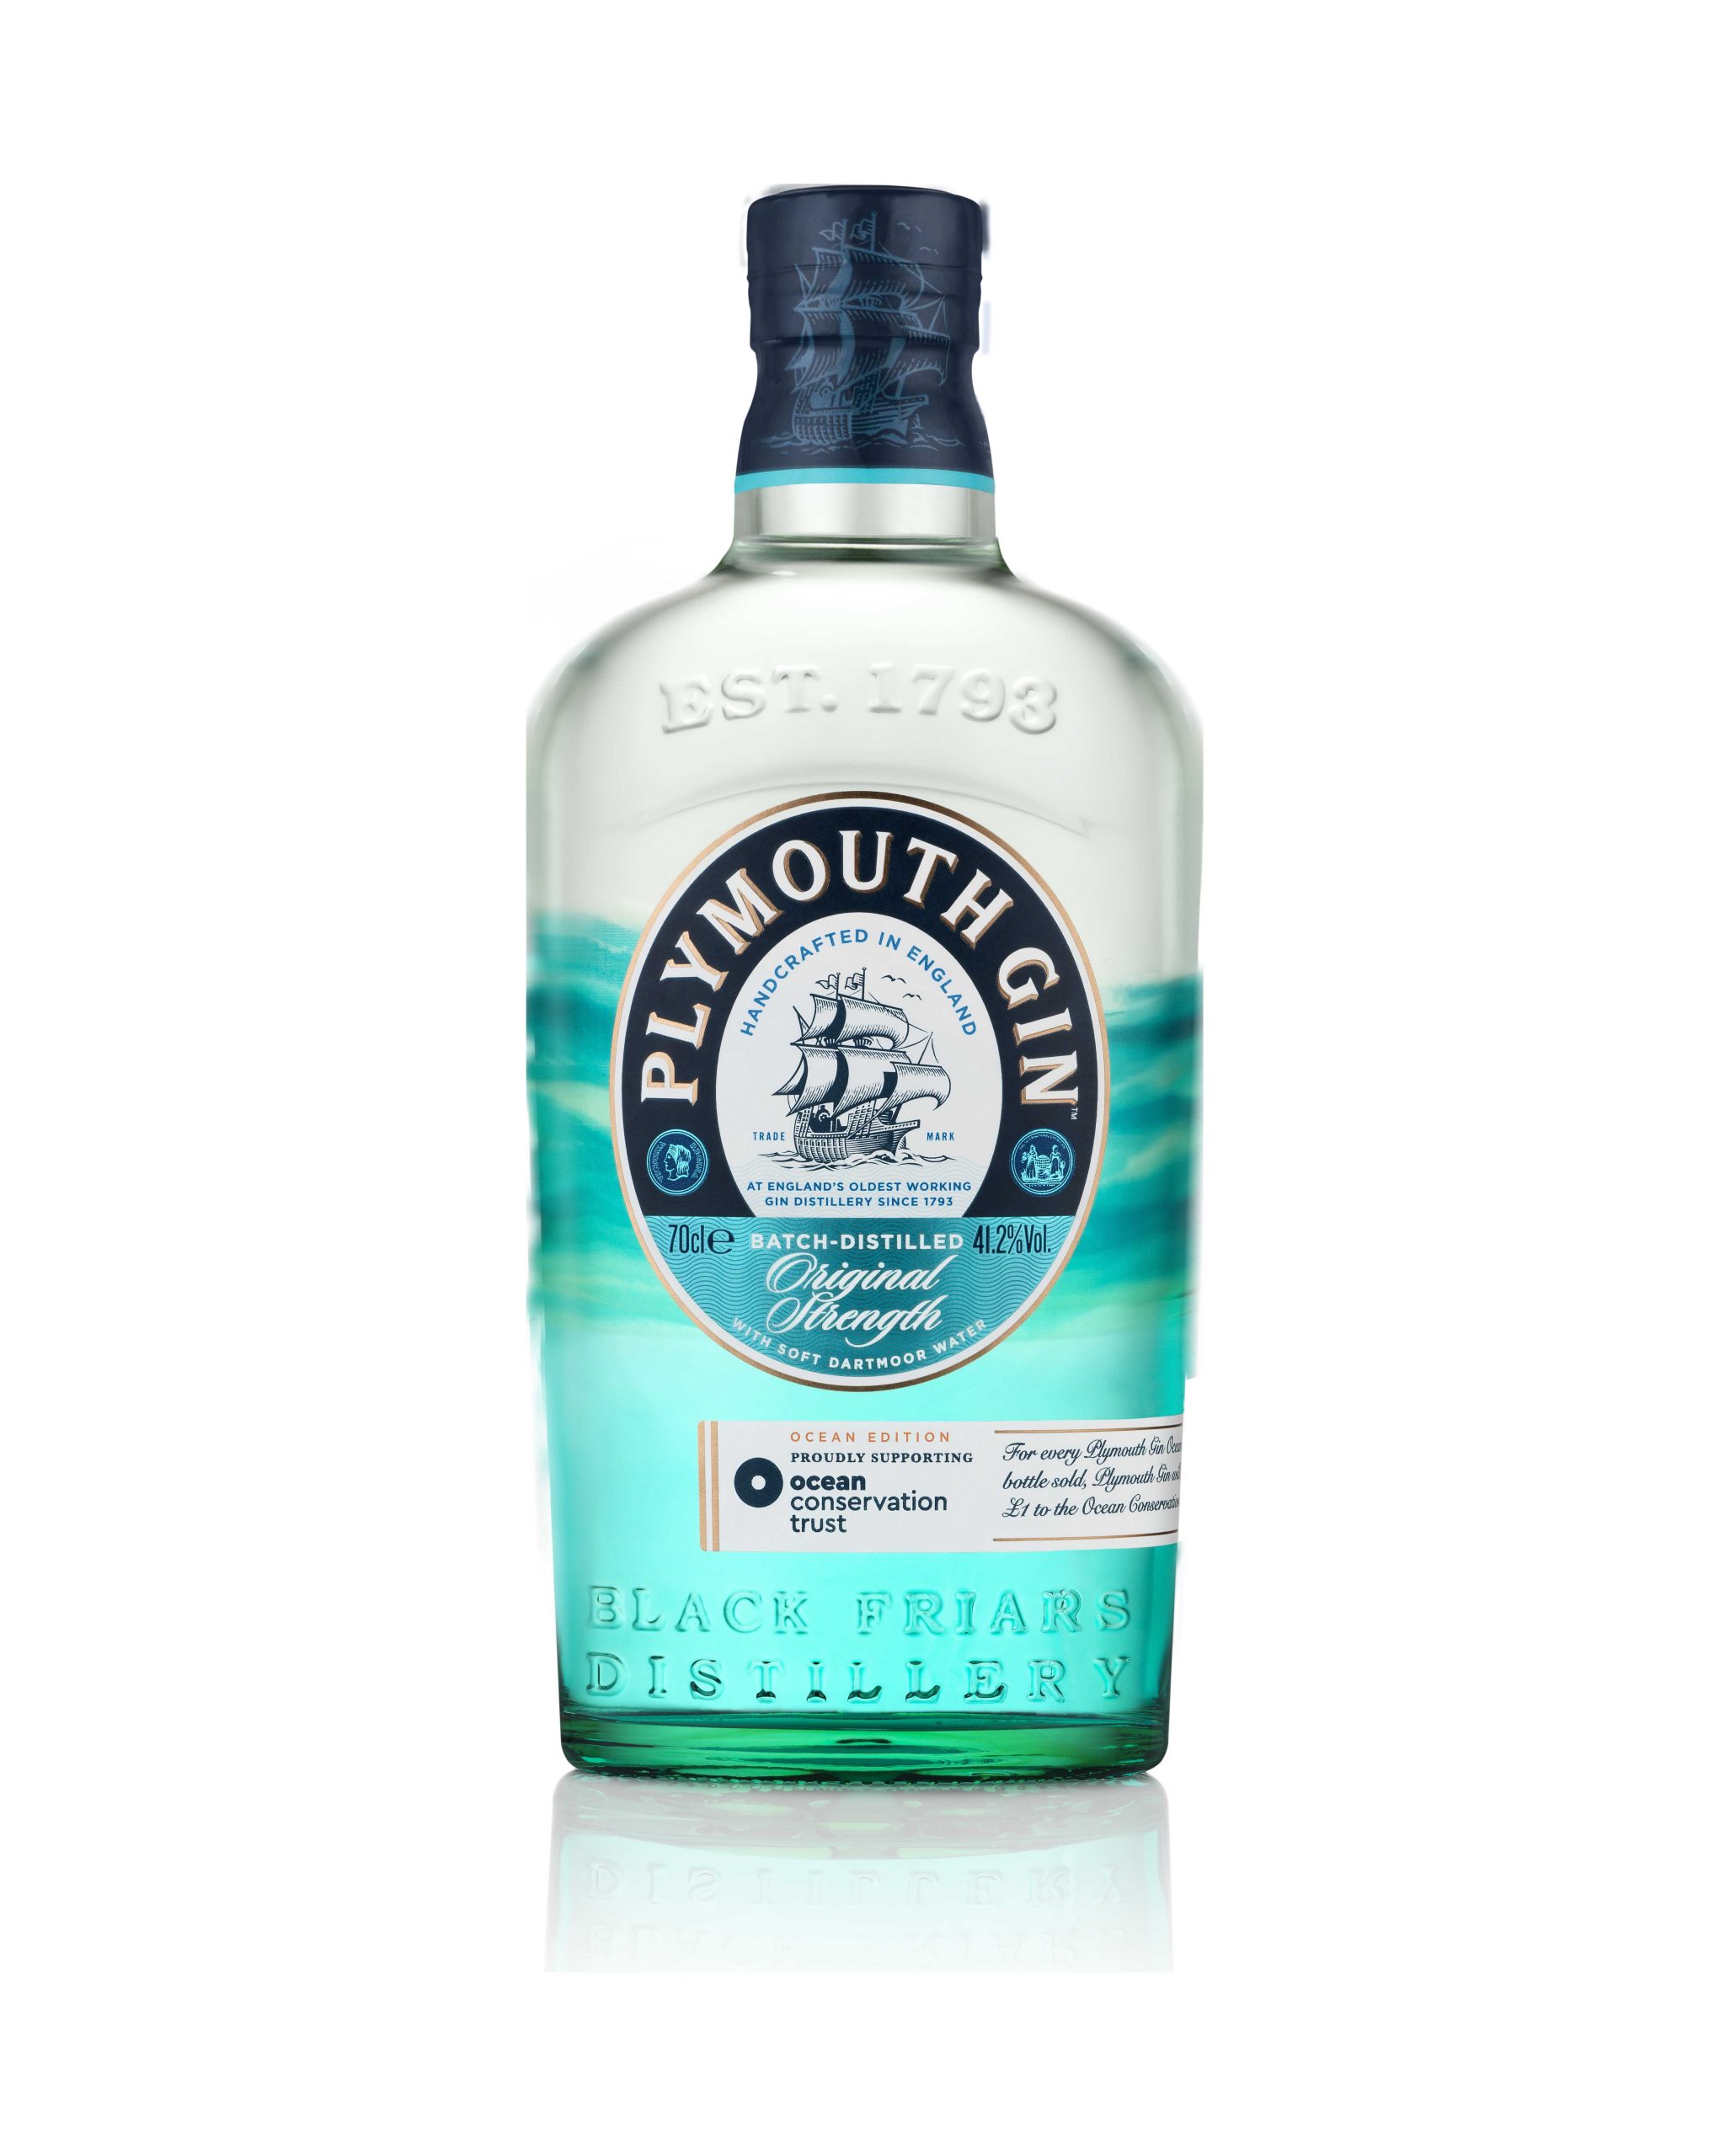 Plymouth Gin makes waves with new limited-edition bottle